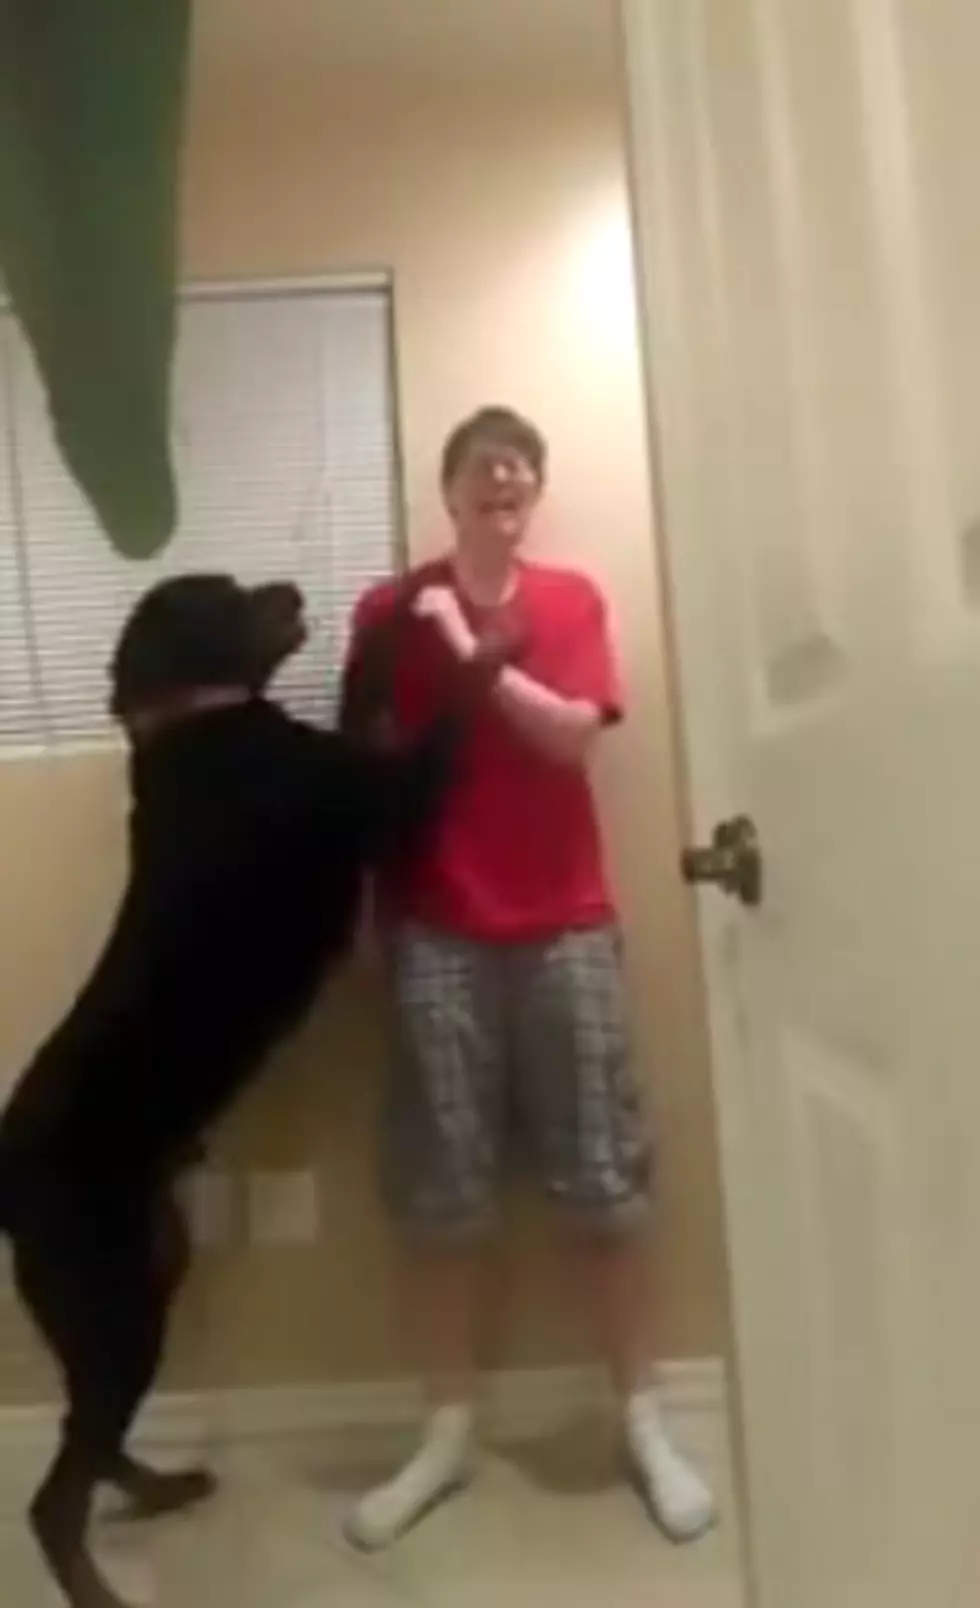 Amazing Service Dog Helps Calm Owner Suffering An Asperger’s-Induced Meltdown [VIDEO]